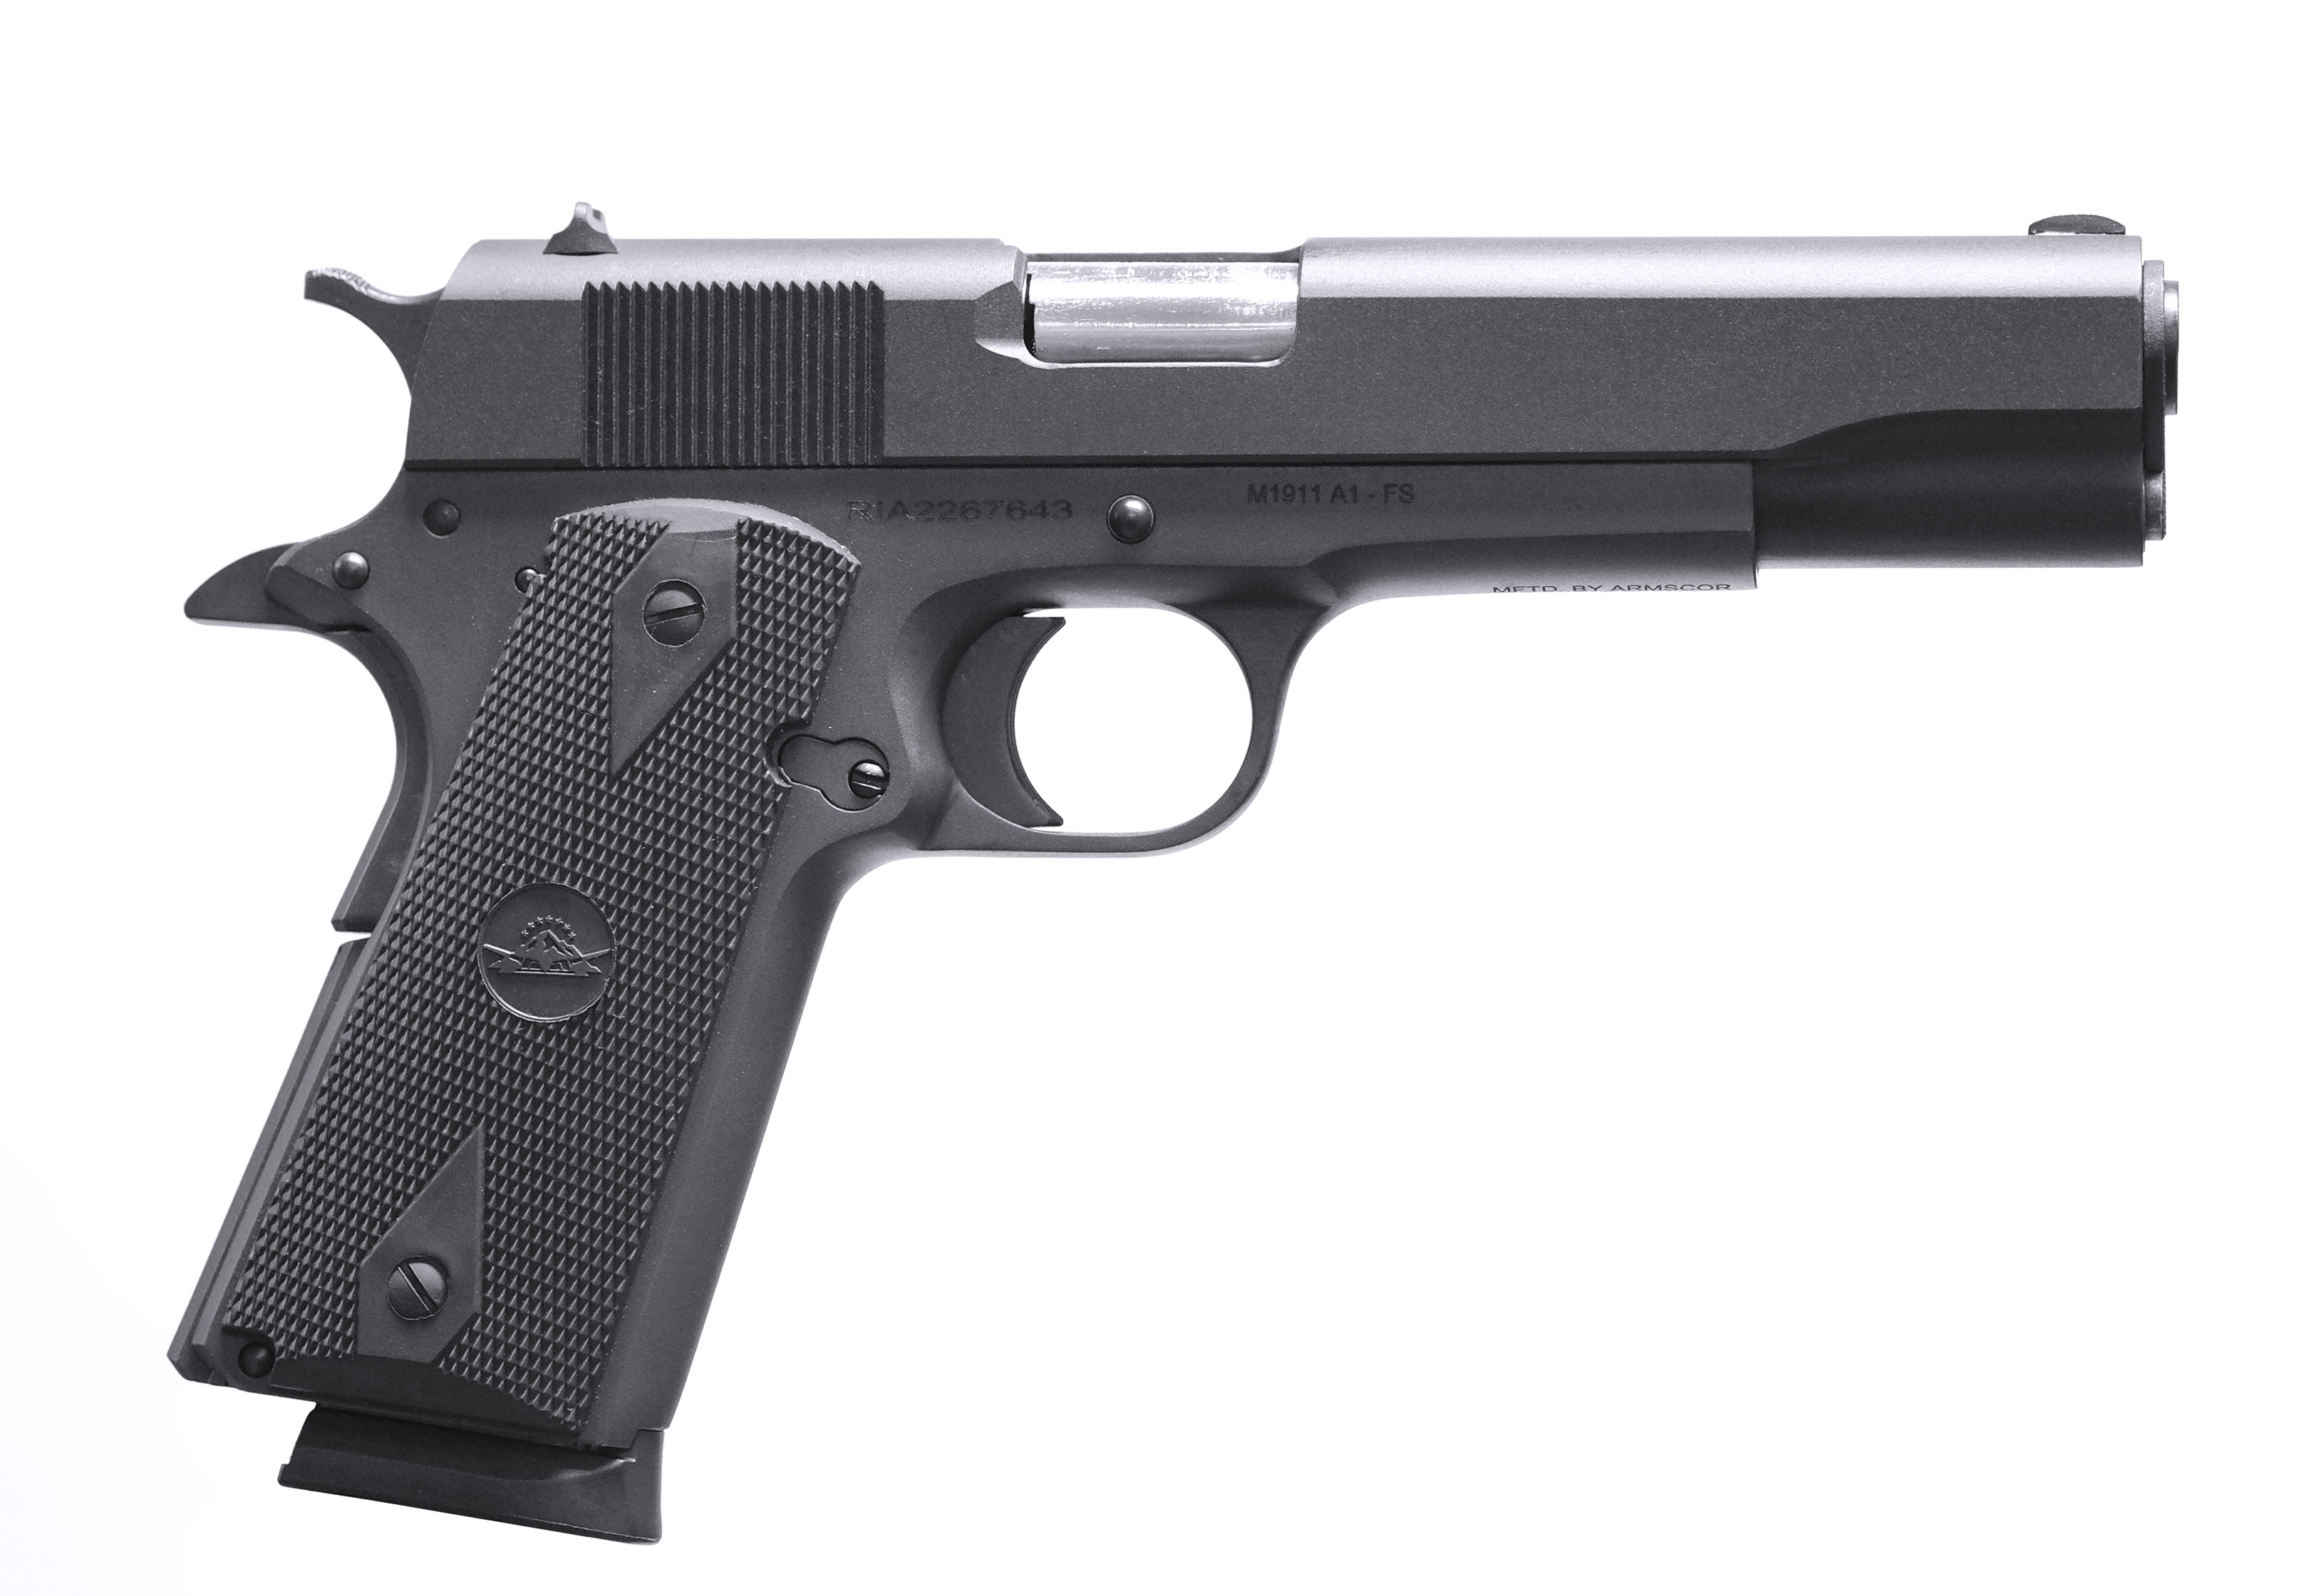 ROCK ISLAND ARMORY 1911 | GI STANDARD | The Outpost - Arms and Munitions